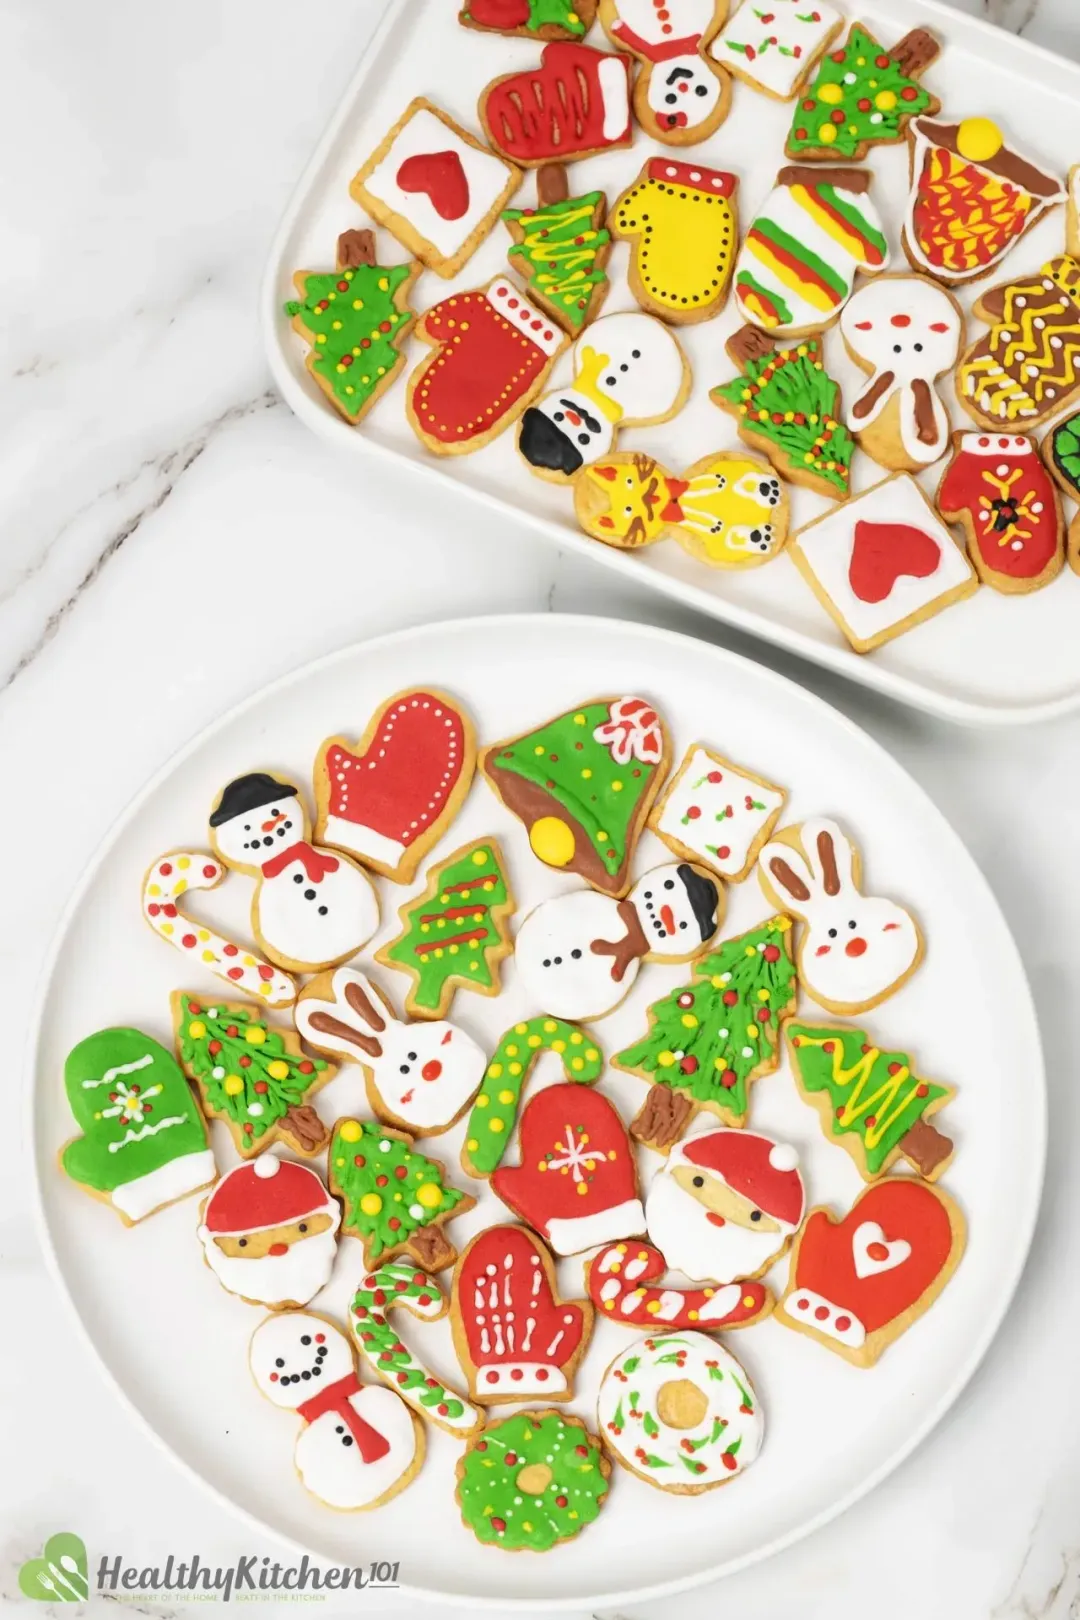 Are These Sugar Cookies Healthy